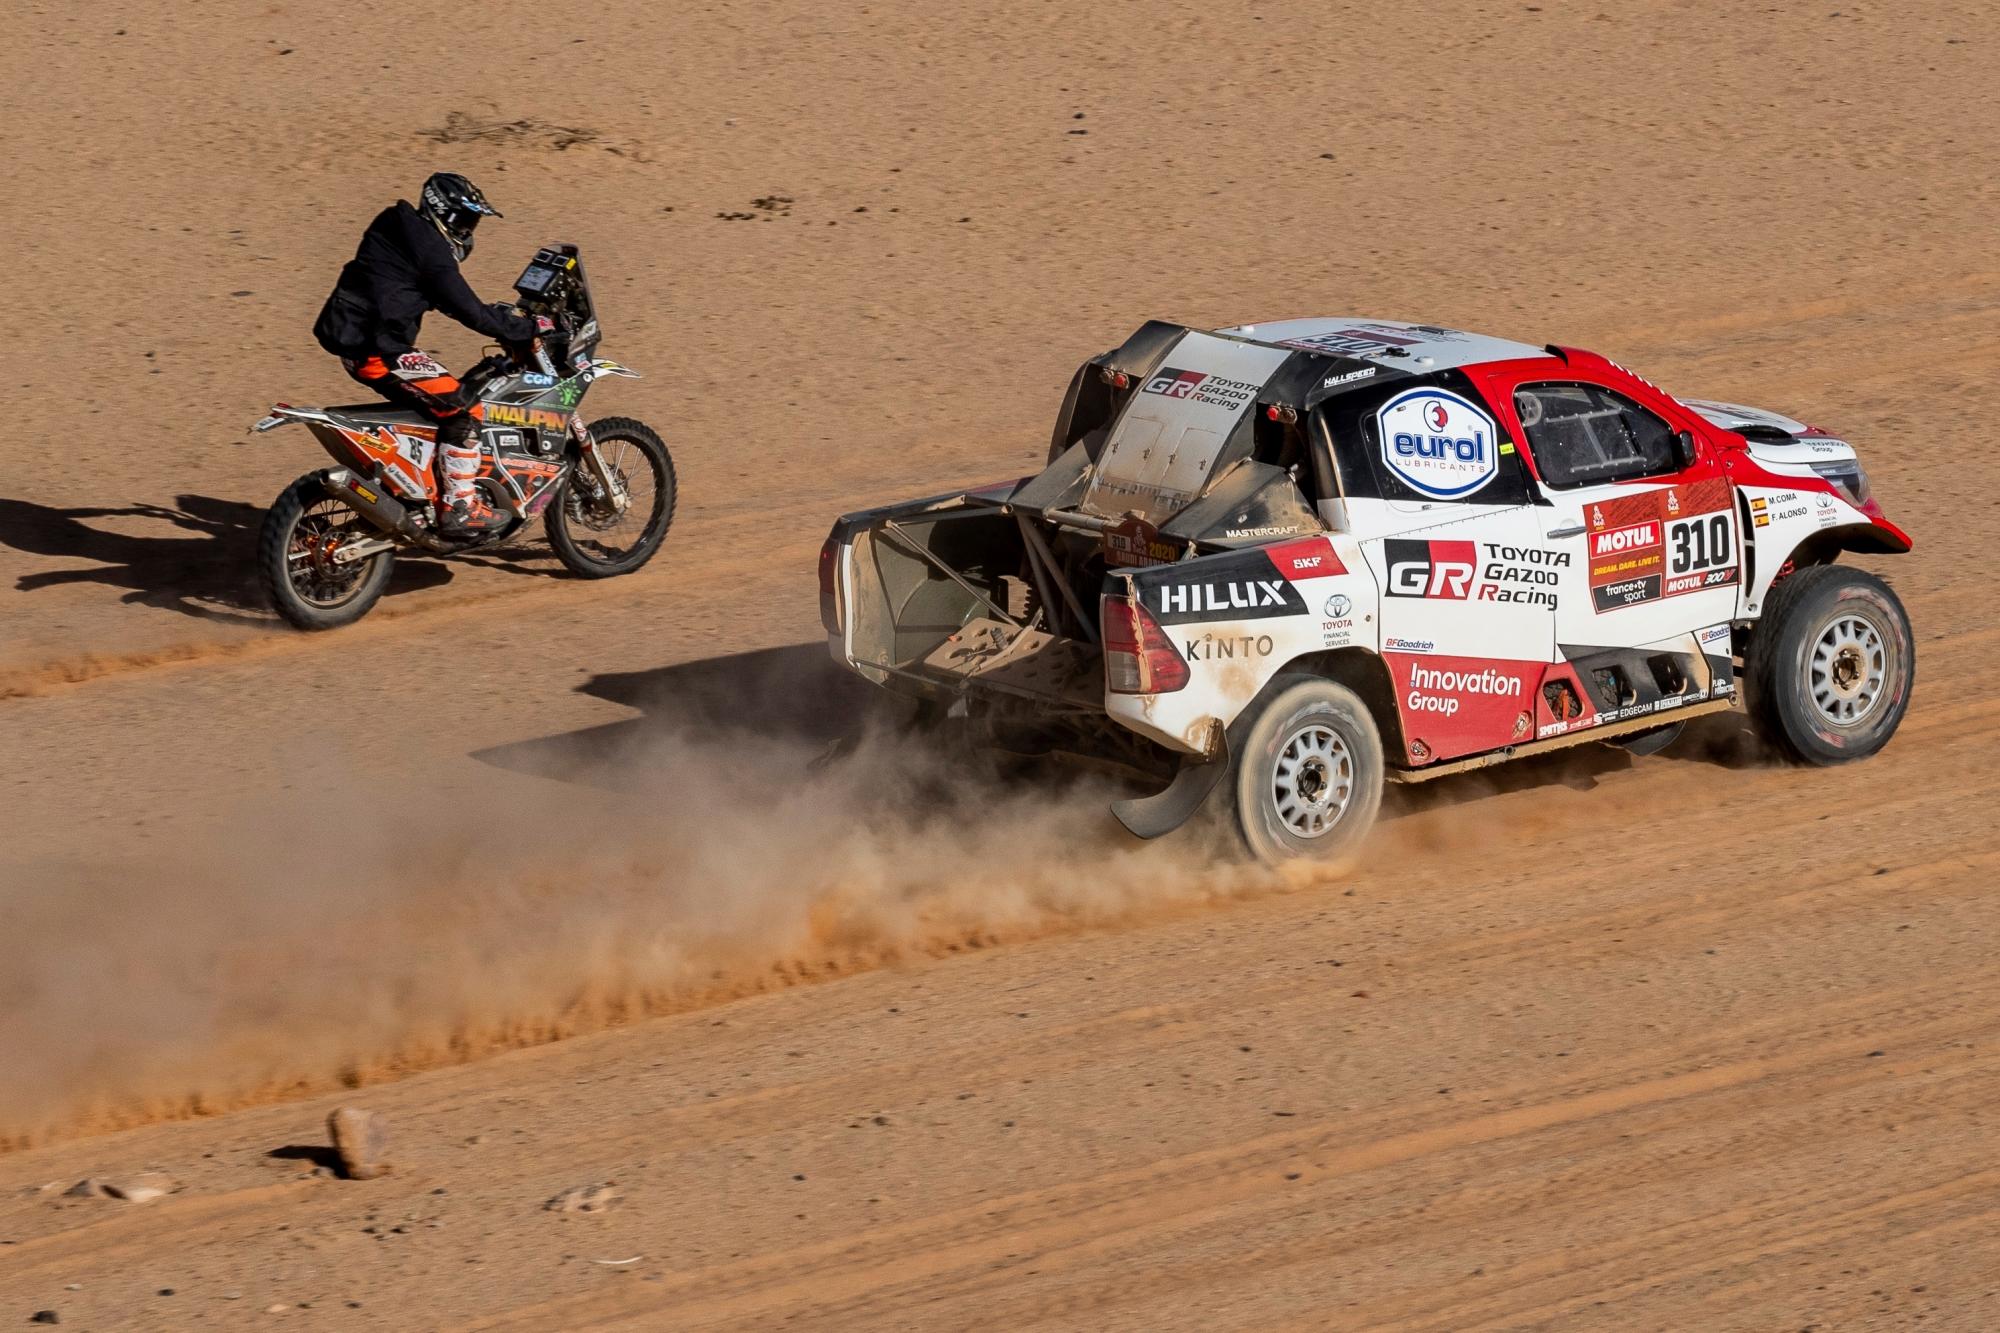 Driver Fernando Alonso, of Spain, and co-driver Marc Coma, of Spain, race their Toyota next to motorbiker Charlie Herbst of Franceduring stage four of the Dakar Rally between Neom and Al Ula, in Saudi Arabia, Wednesday, Jan. 8, 2020. (AP Photo/Bernat Armangue)